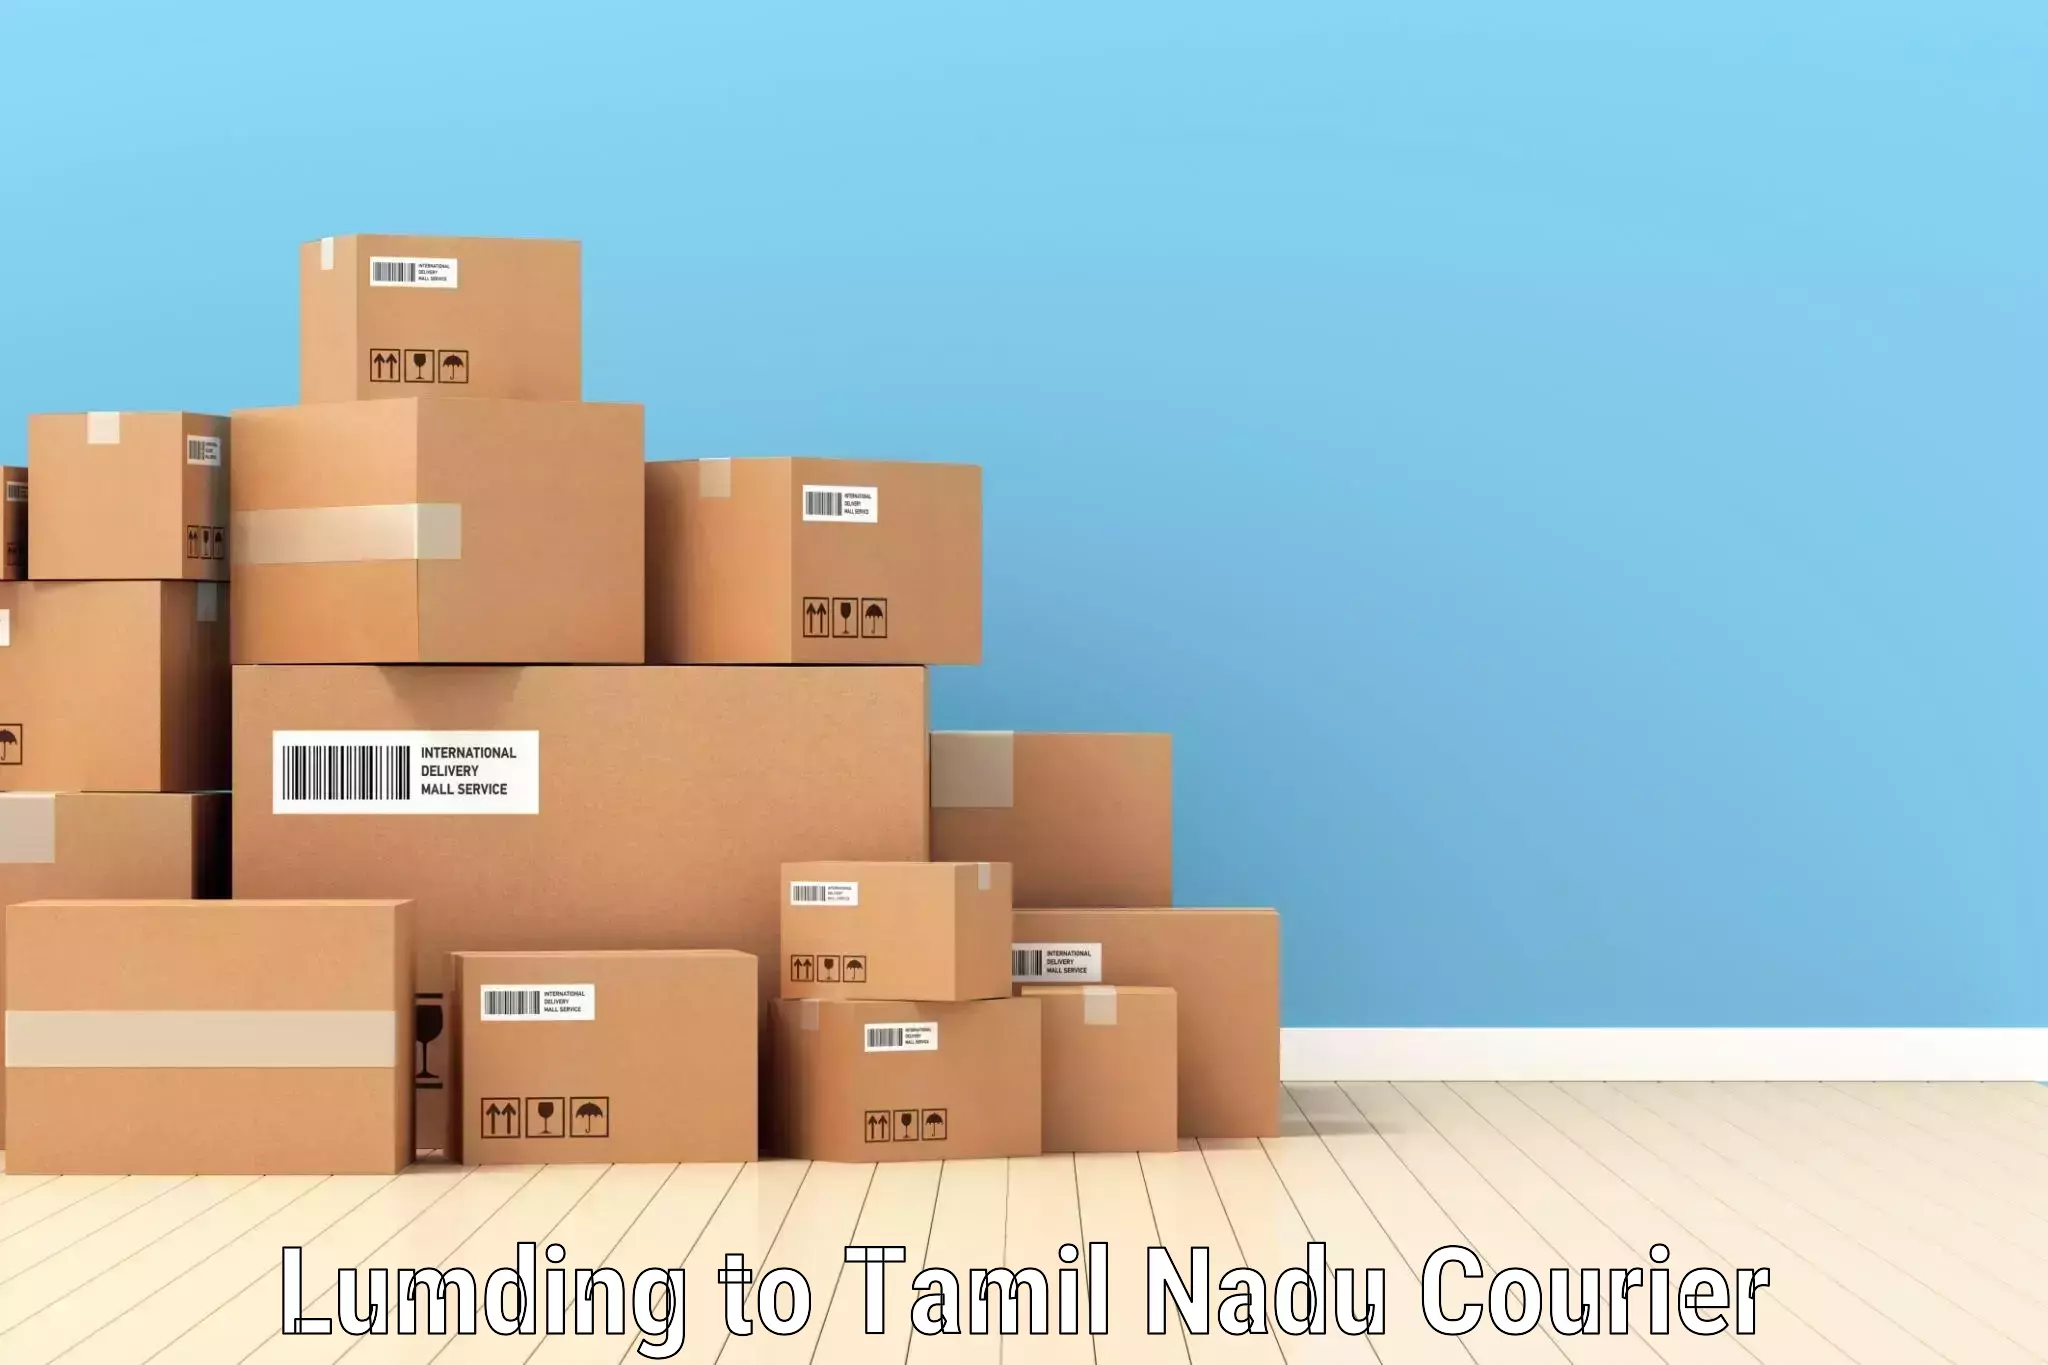 Multi-national courier services Lumding to Chennai